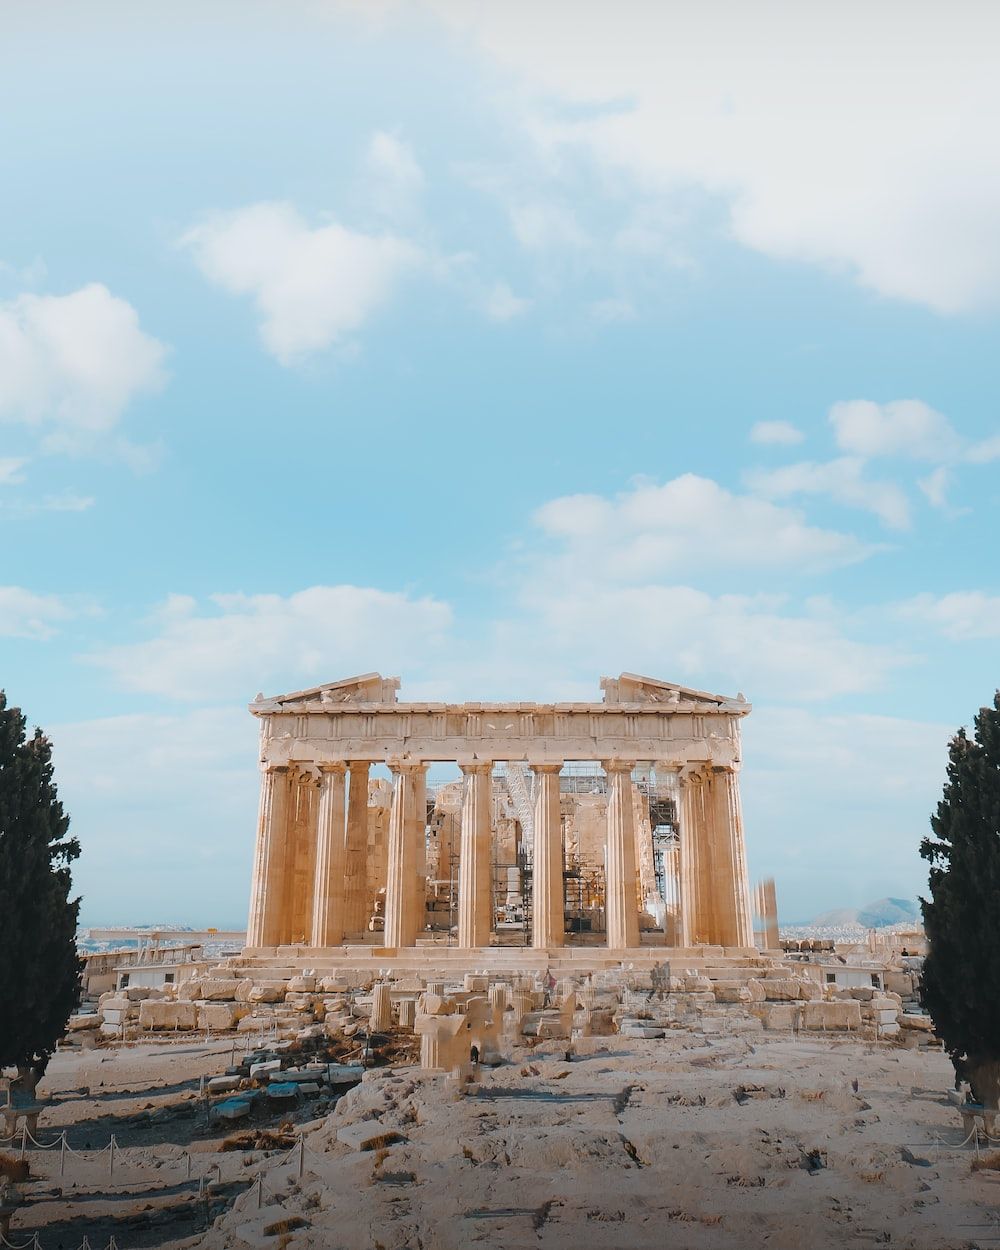 A picture of an old building with trees - Greek mythology